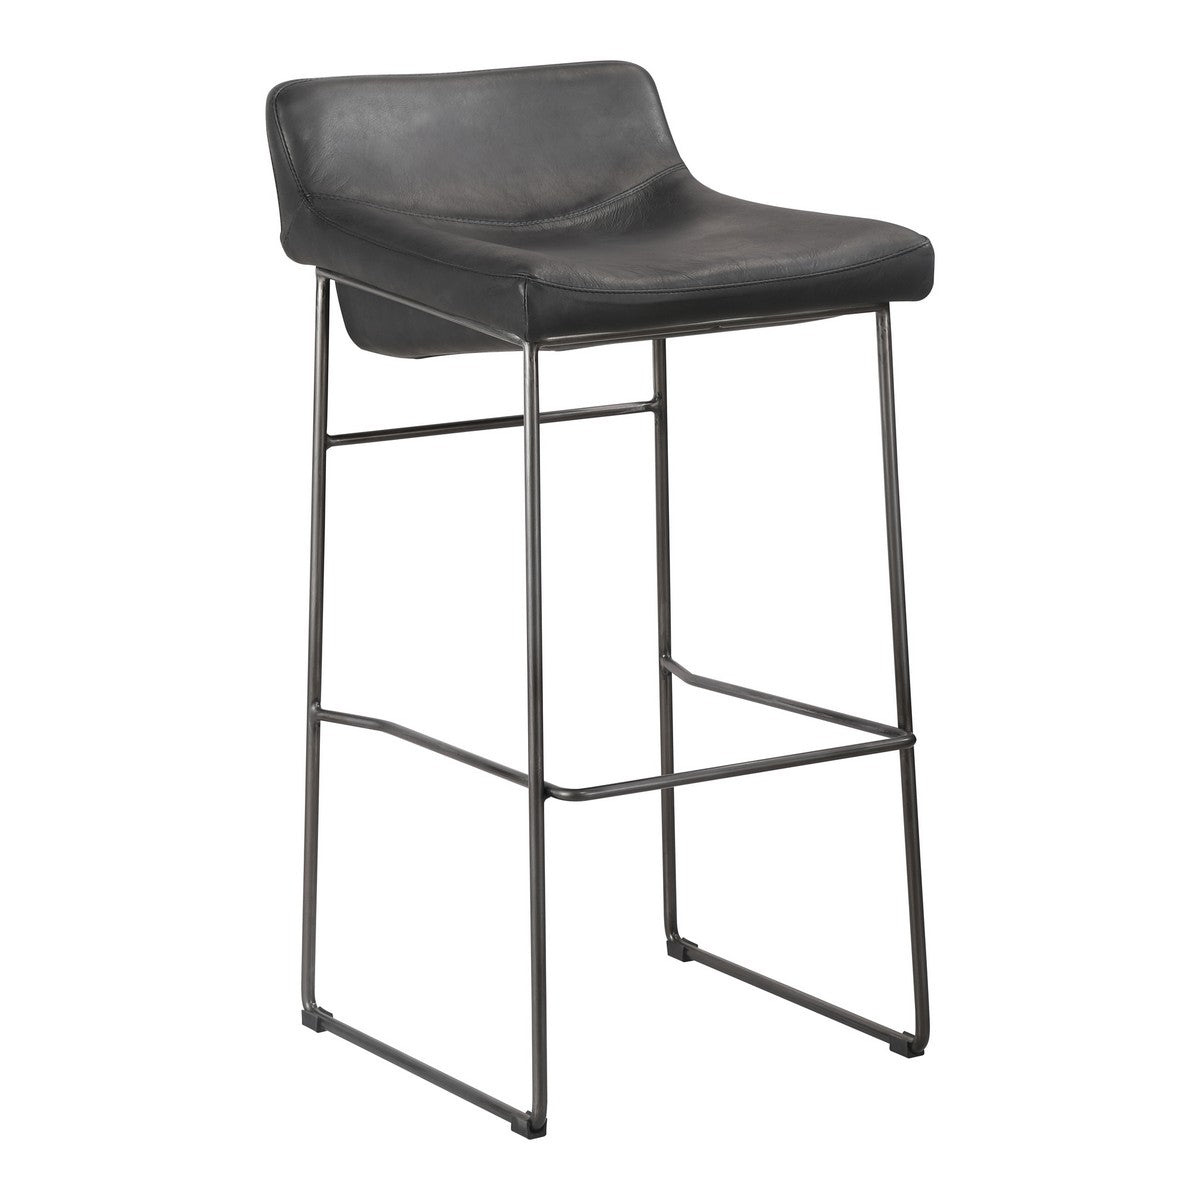 Moe's Home Collection Starlet Barstool Black-Set of Two - PK-1107-02